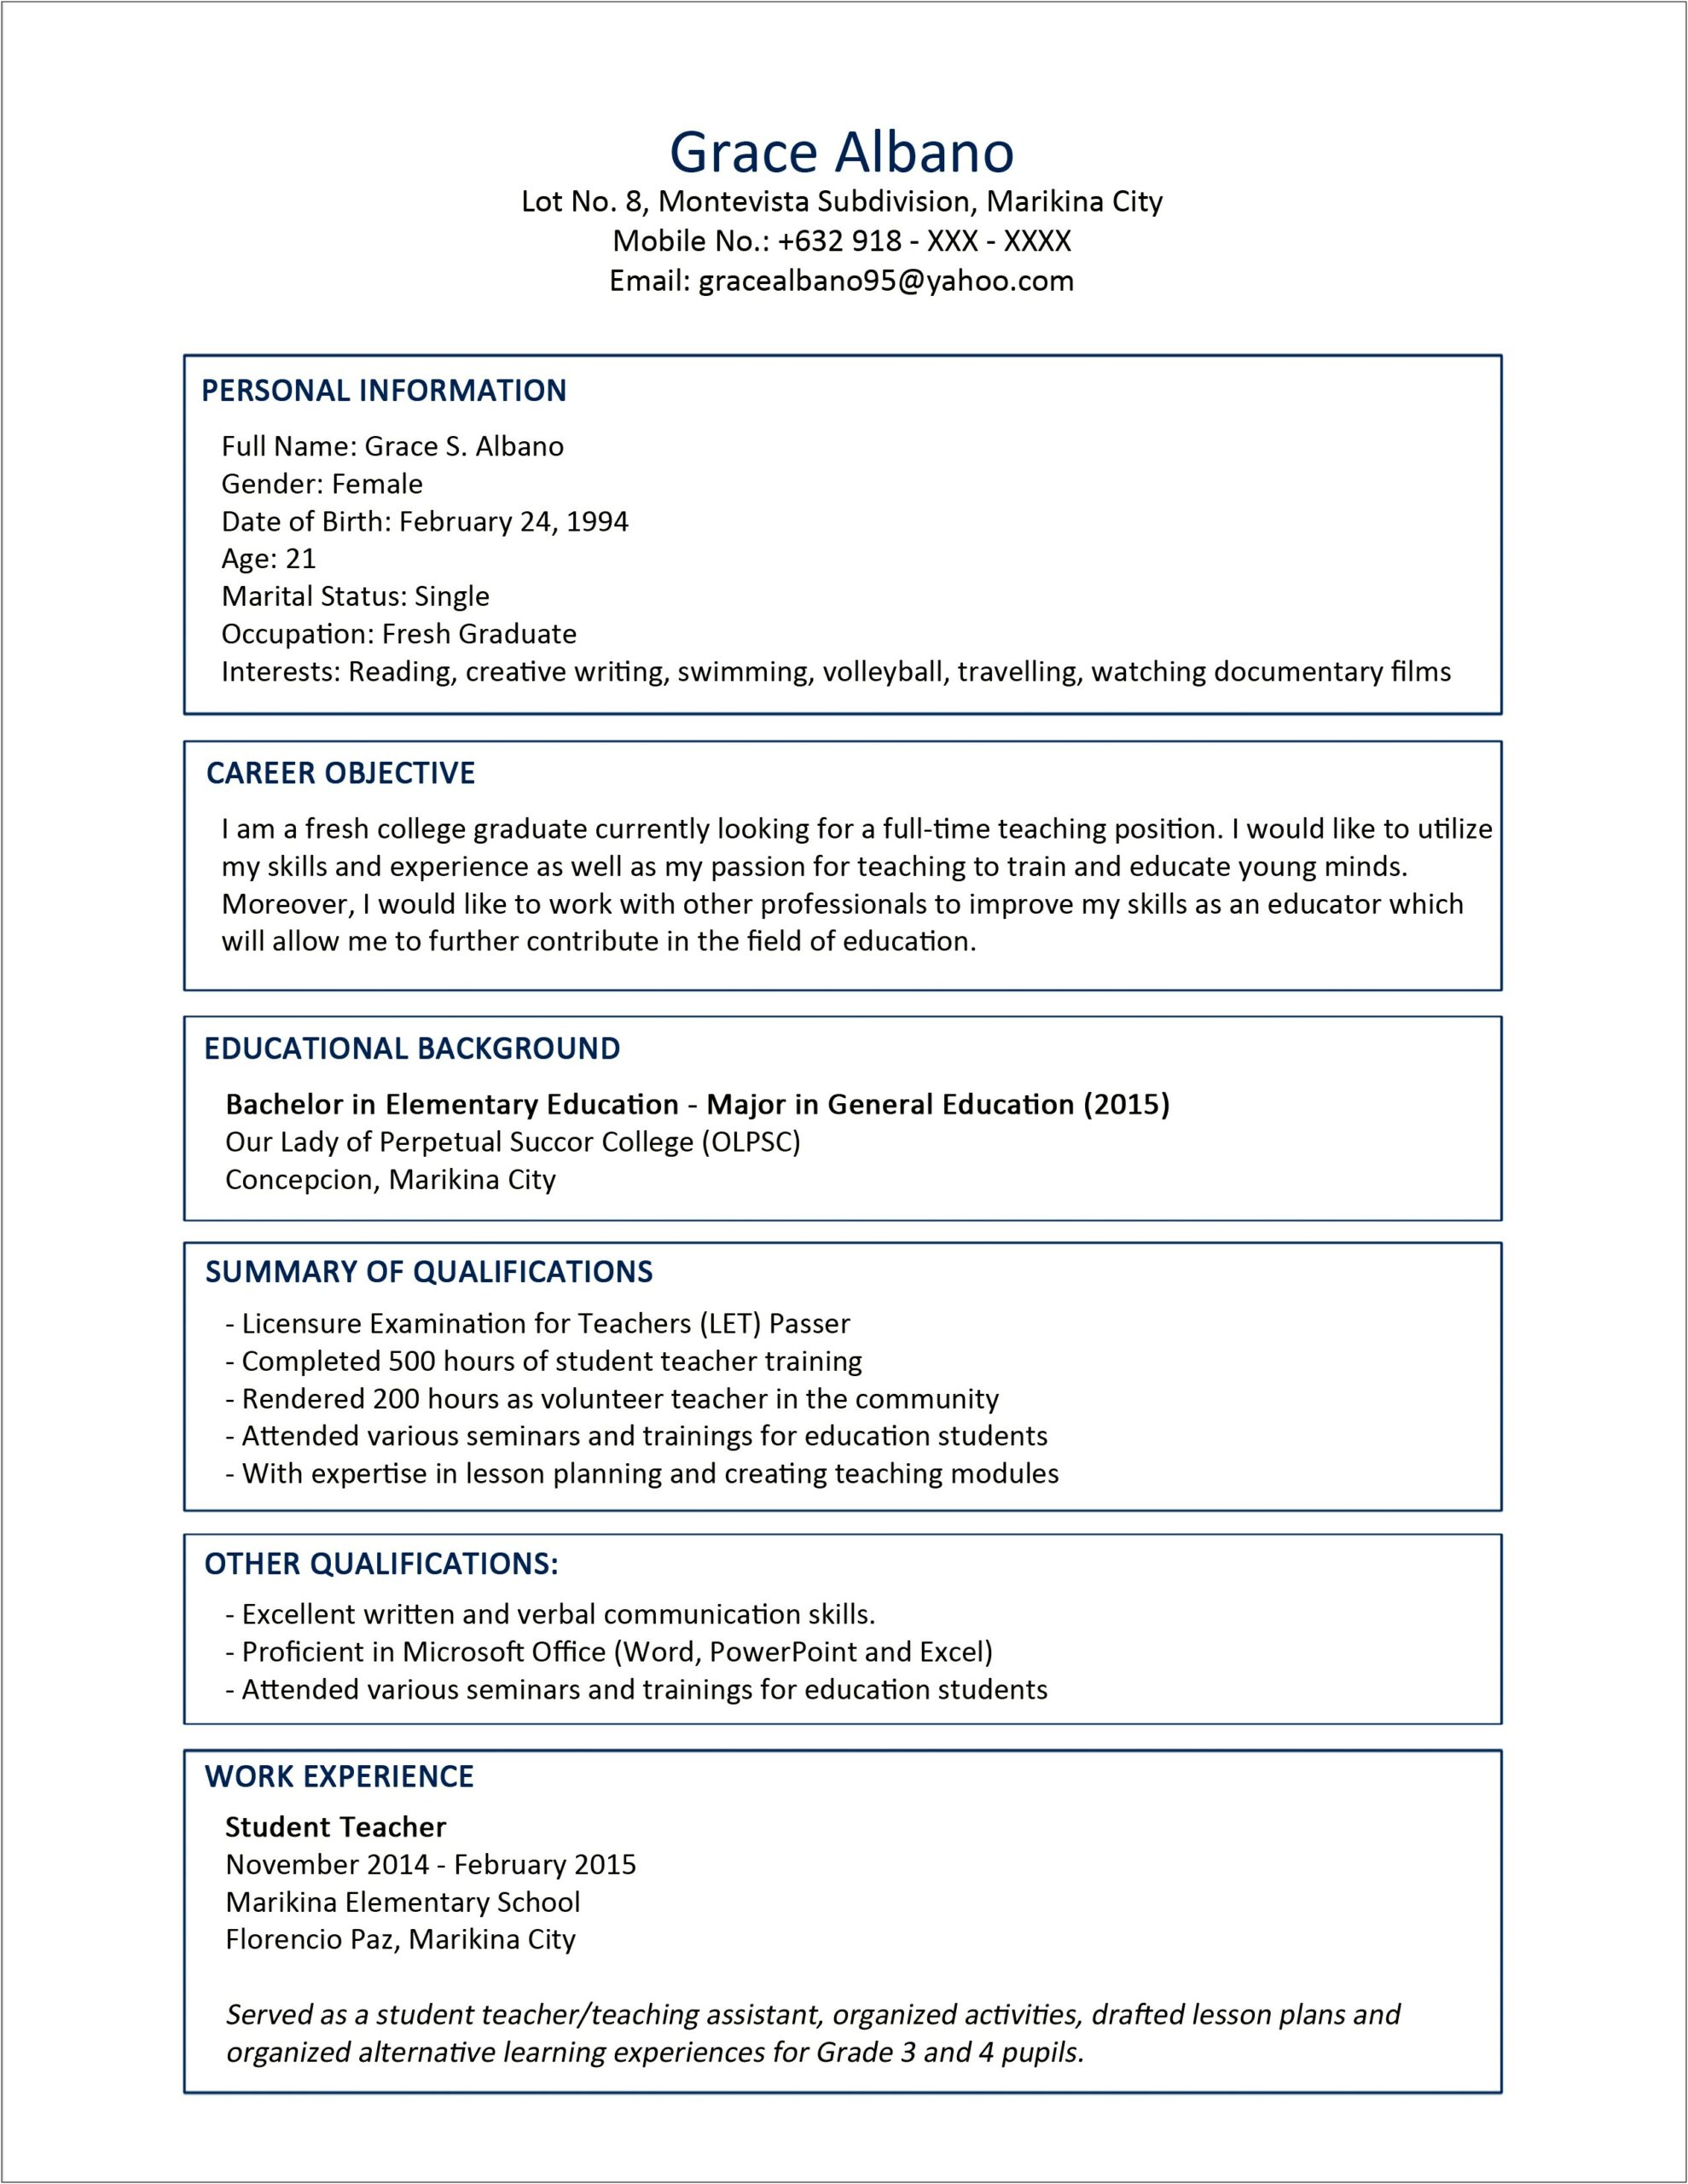 Highlights Of Qualifications Resume Examples